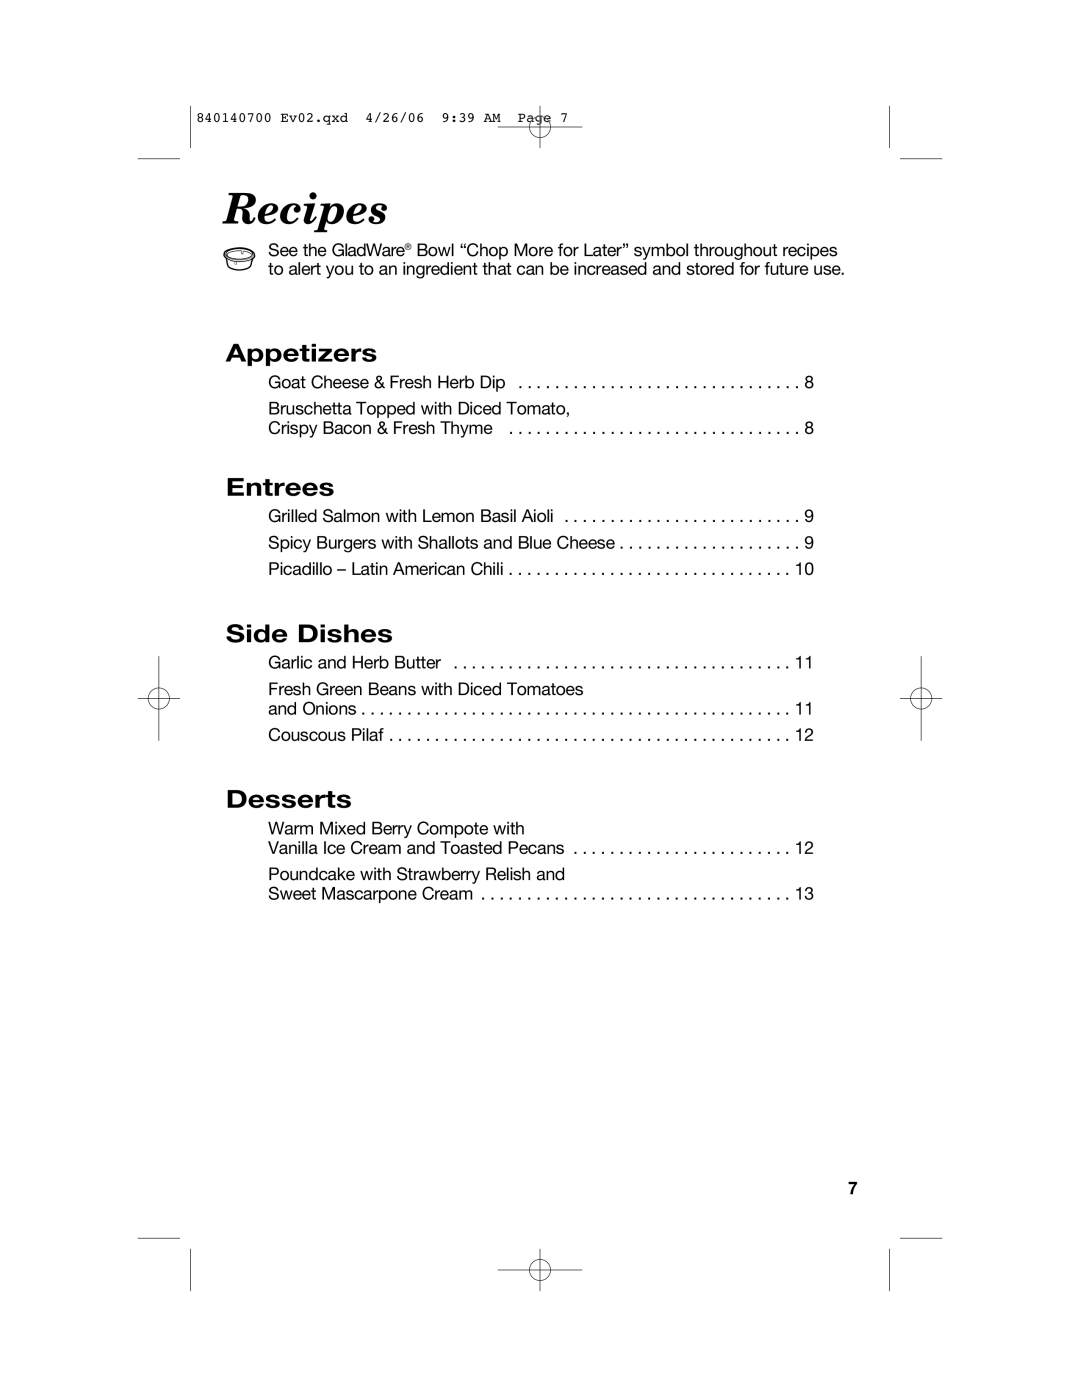 Hamilton Beach 72850 manual Recipes, Appetizers, Entrees, Side Dishes, Desserts 